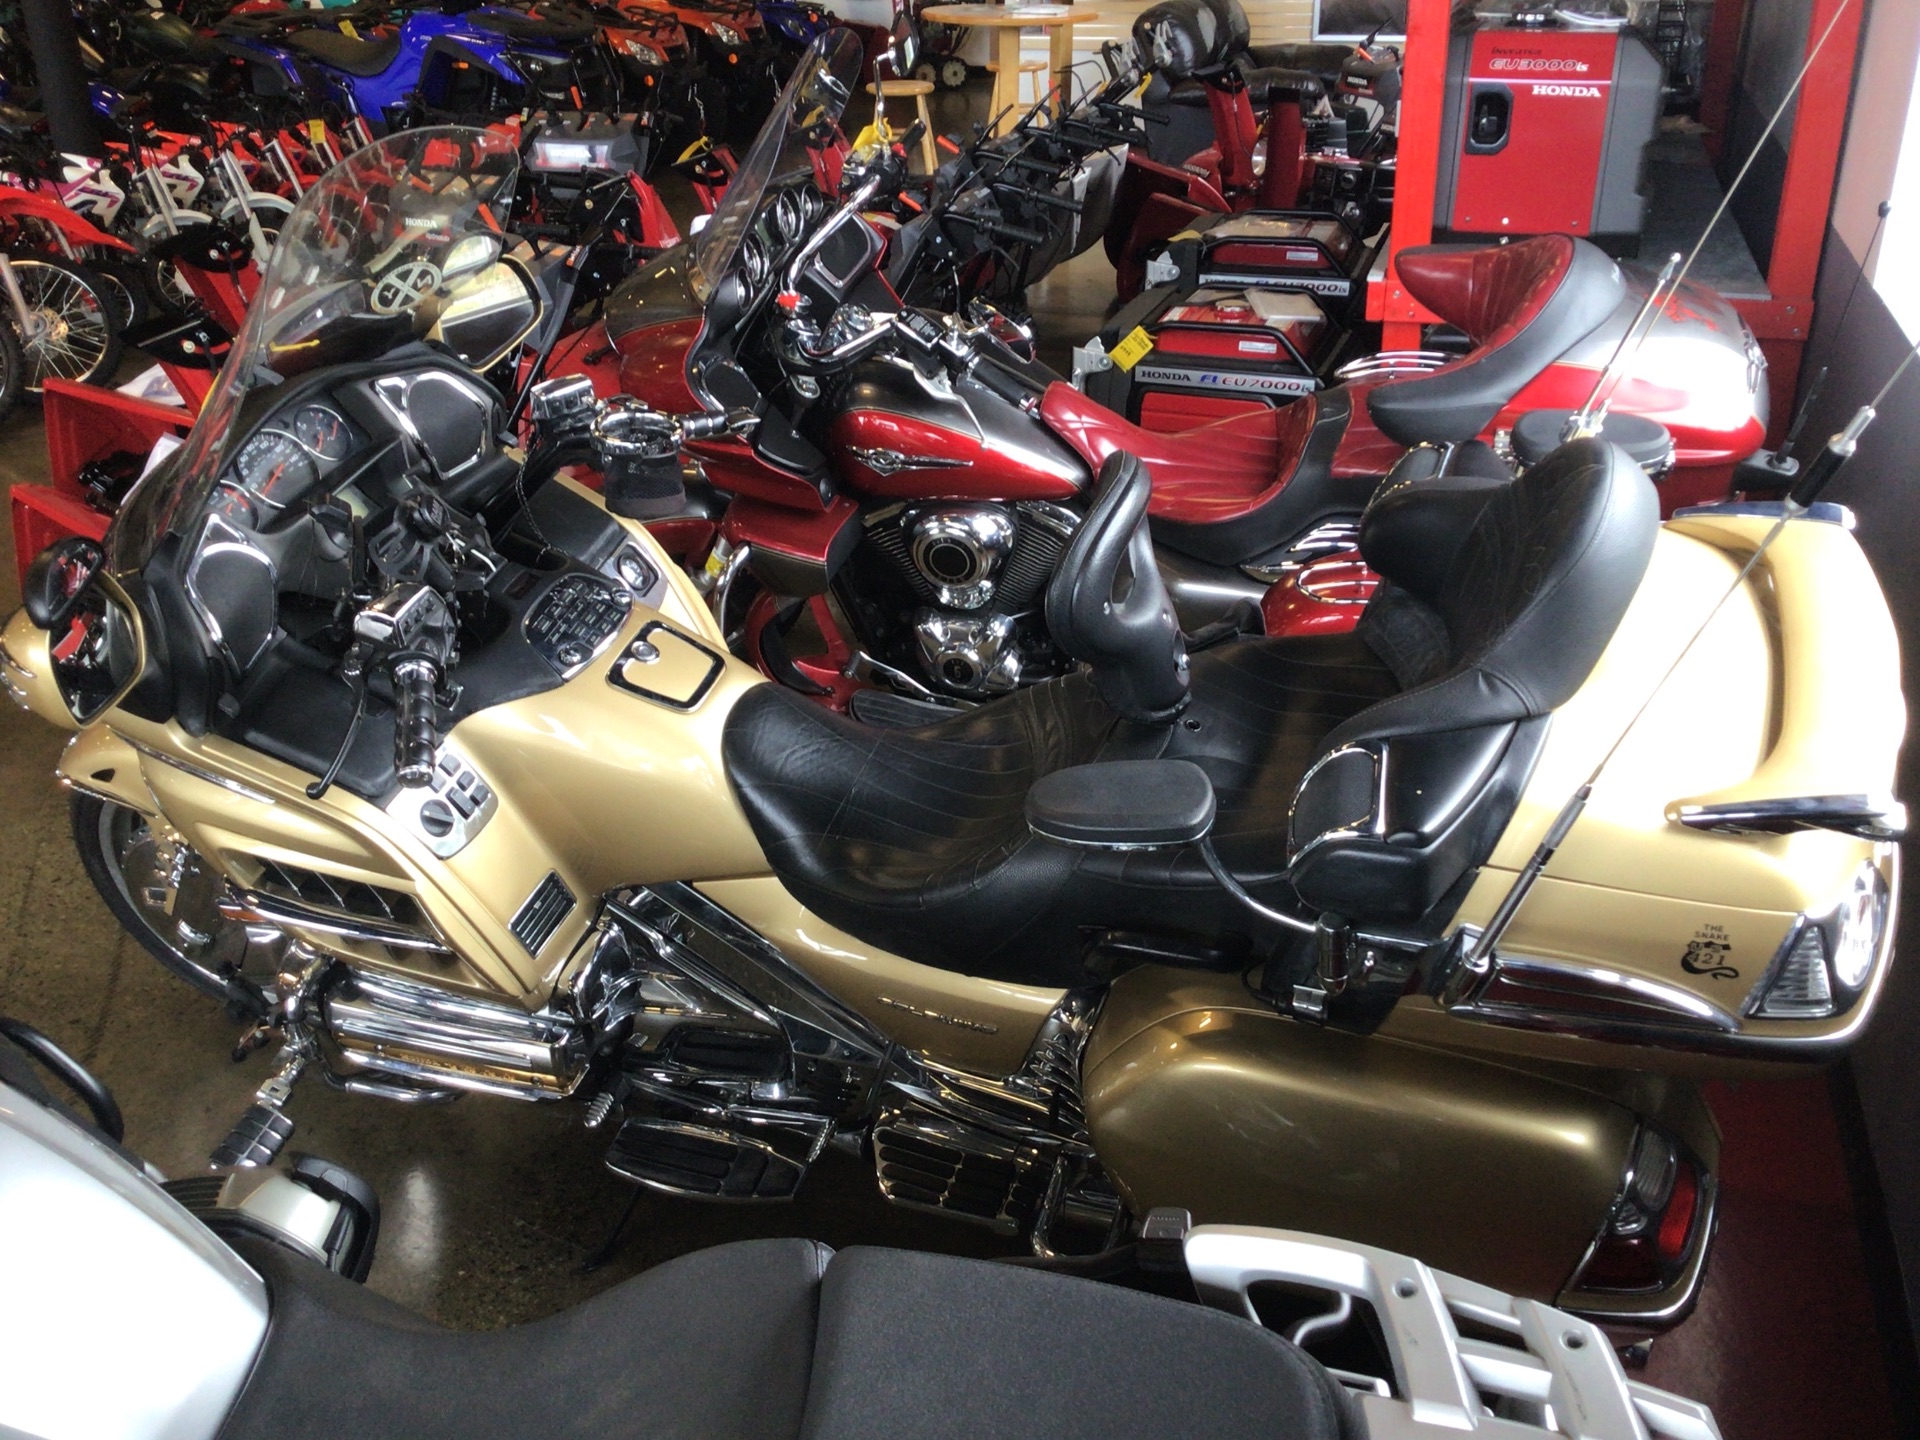 2006 Honda Gold Wing® Audio / Comfort in Middletown, New York - Photo 4